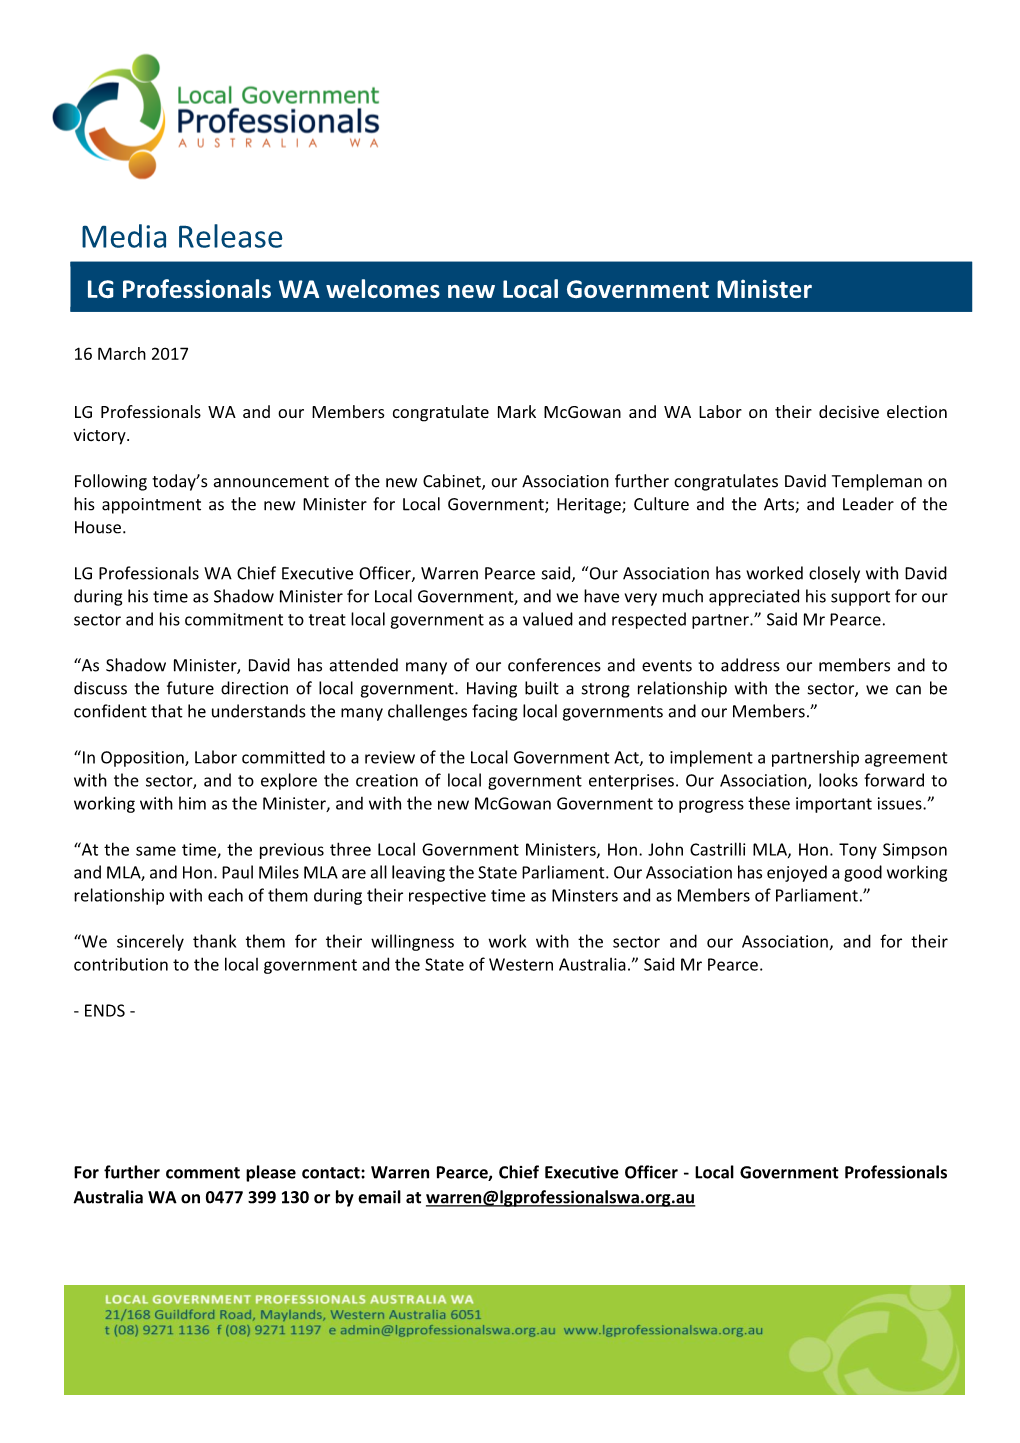 Media Release LG Professionals WA Welcomes New Local Government Minister